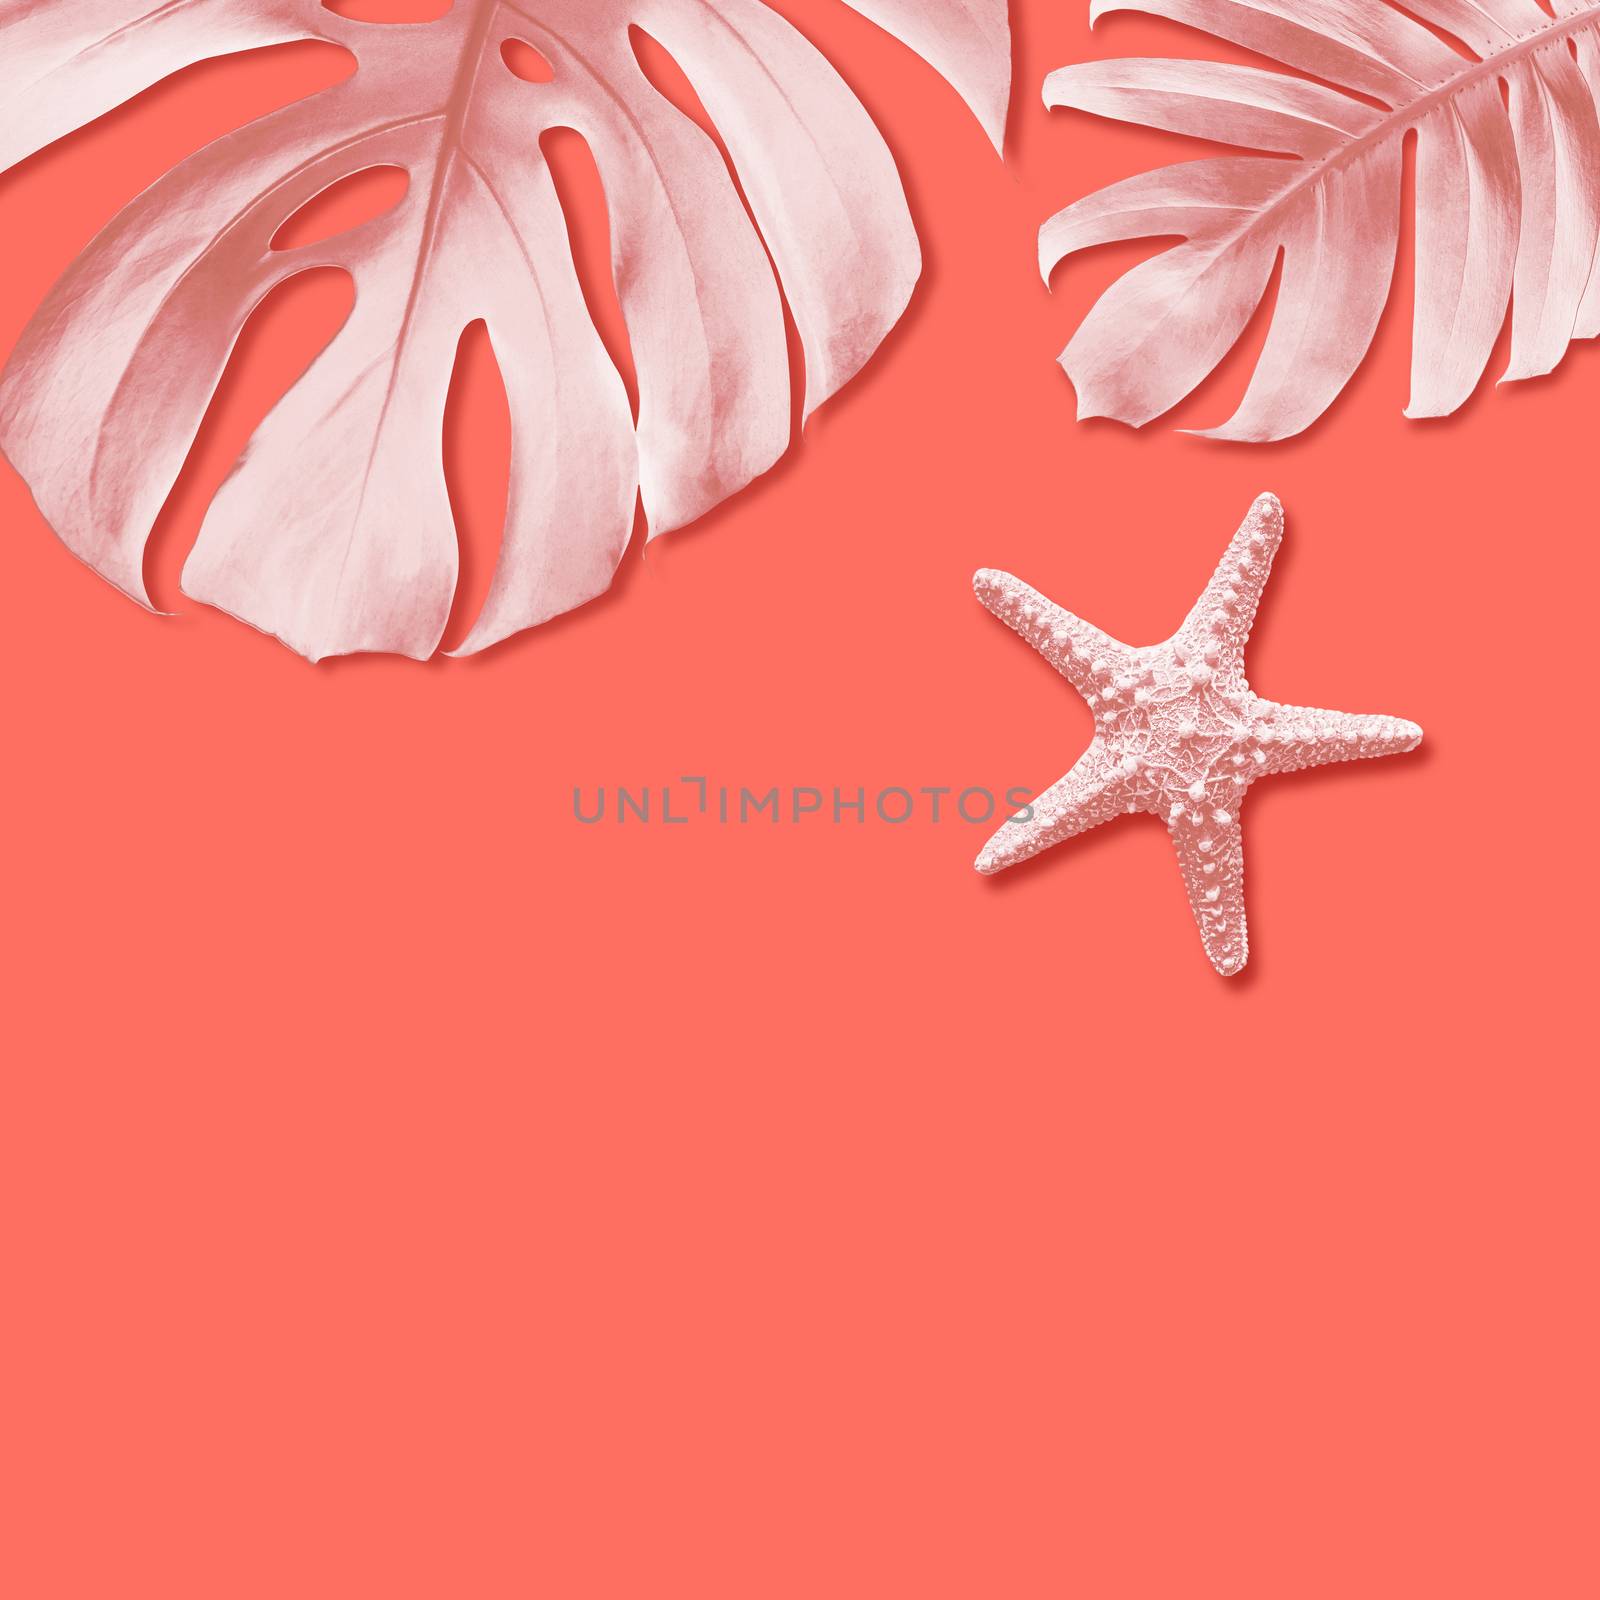 Starfish and summer tropical leaves on orange background with copy space